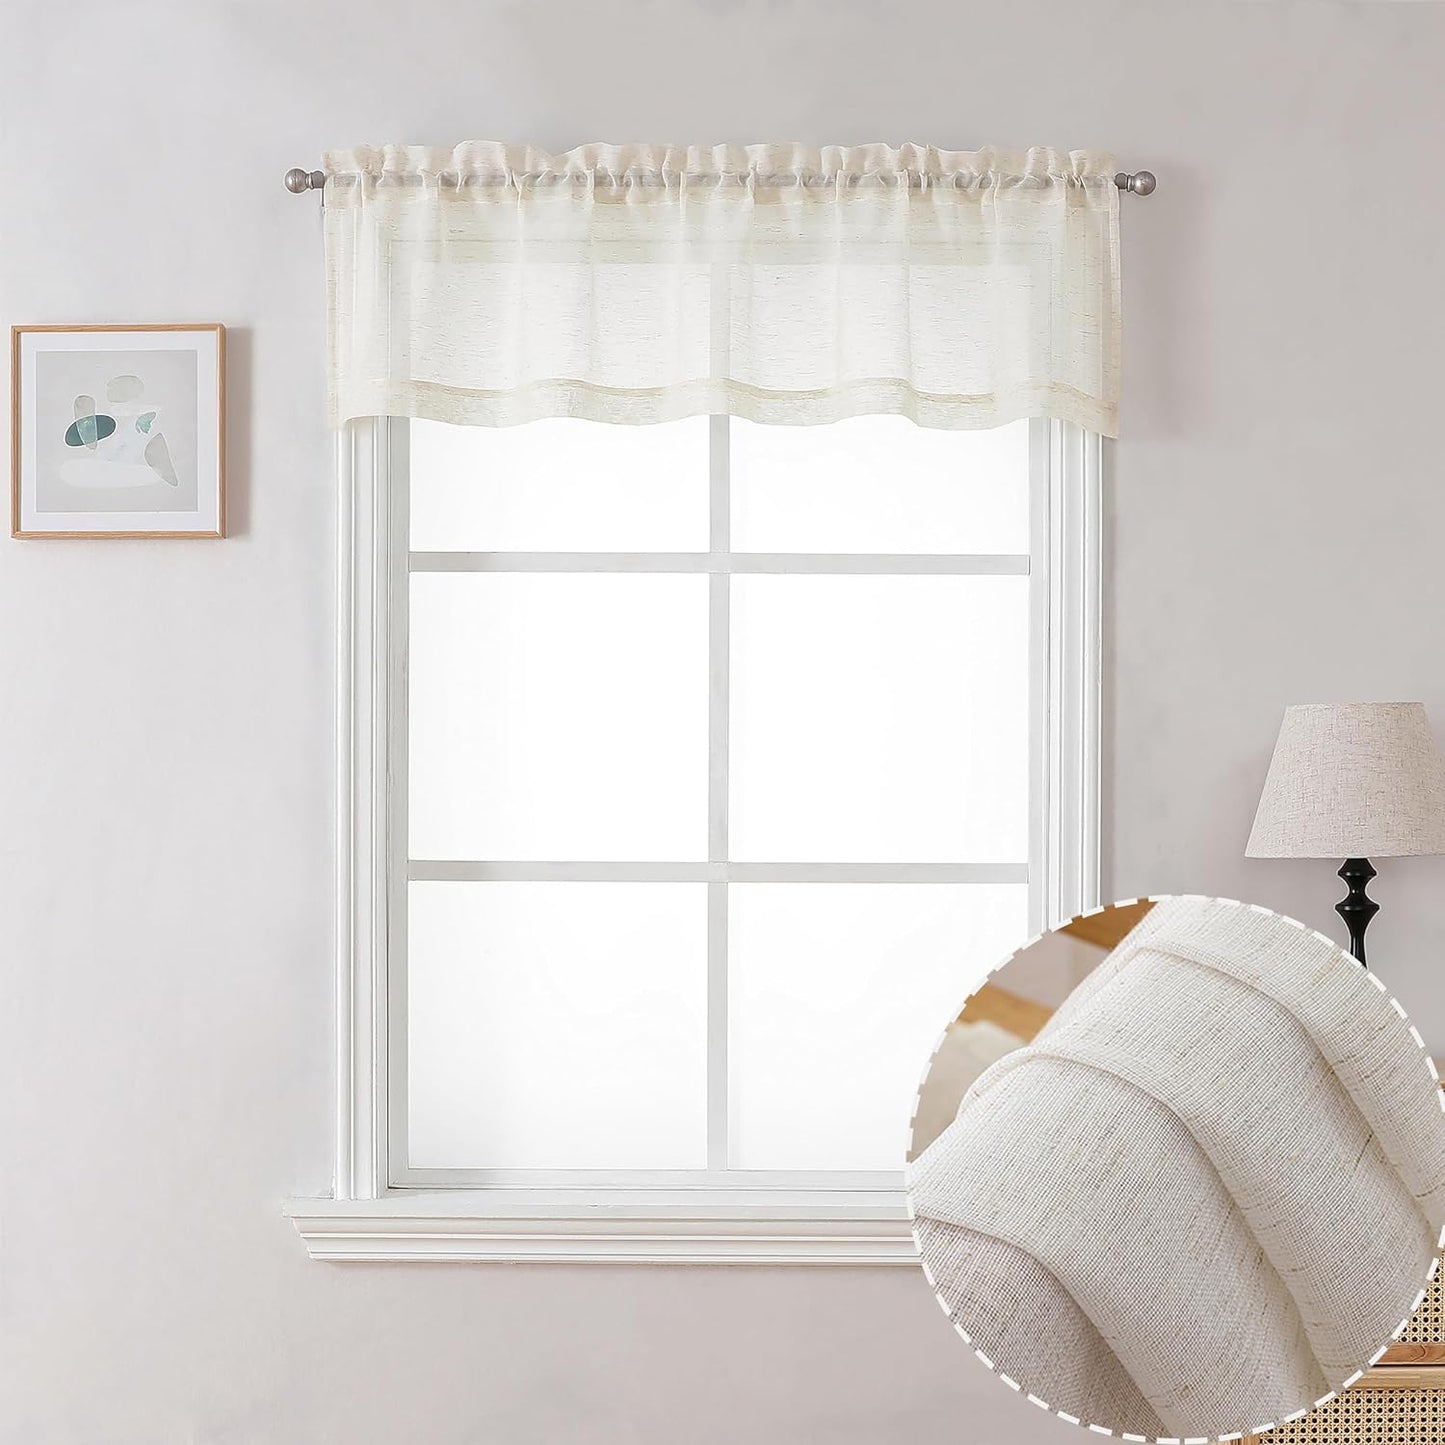 OWENIE White Sheer Valance for Window, Small Short Rod Pocket Voile Valance Curtain Window Treatment Decor for Living Room Bathroom Kitchen Cafe Laundry Basement, 60" W X 14" L  OWENIE Natural 60W X 14L 